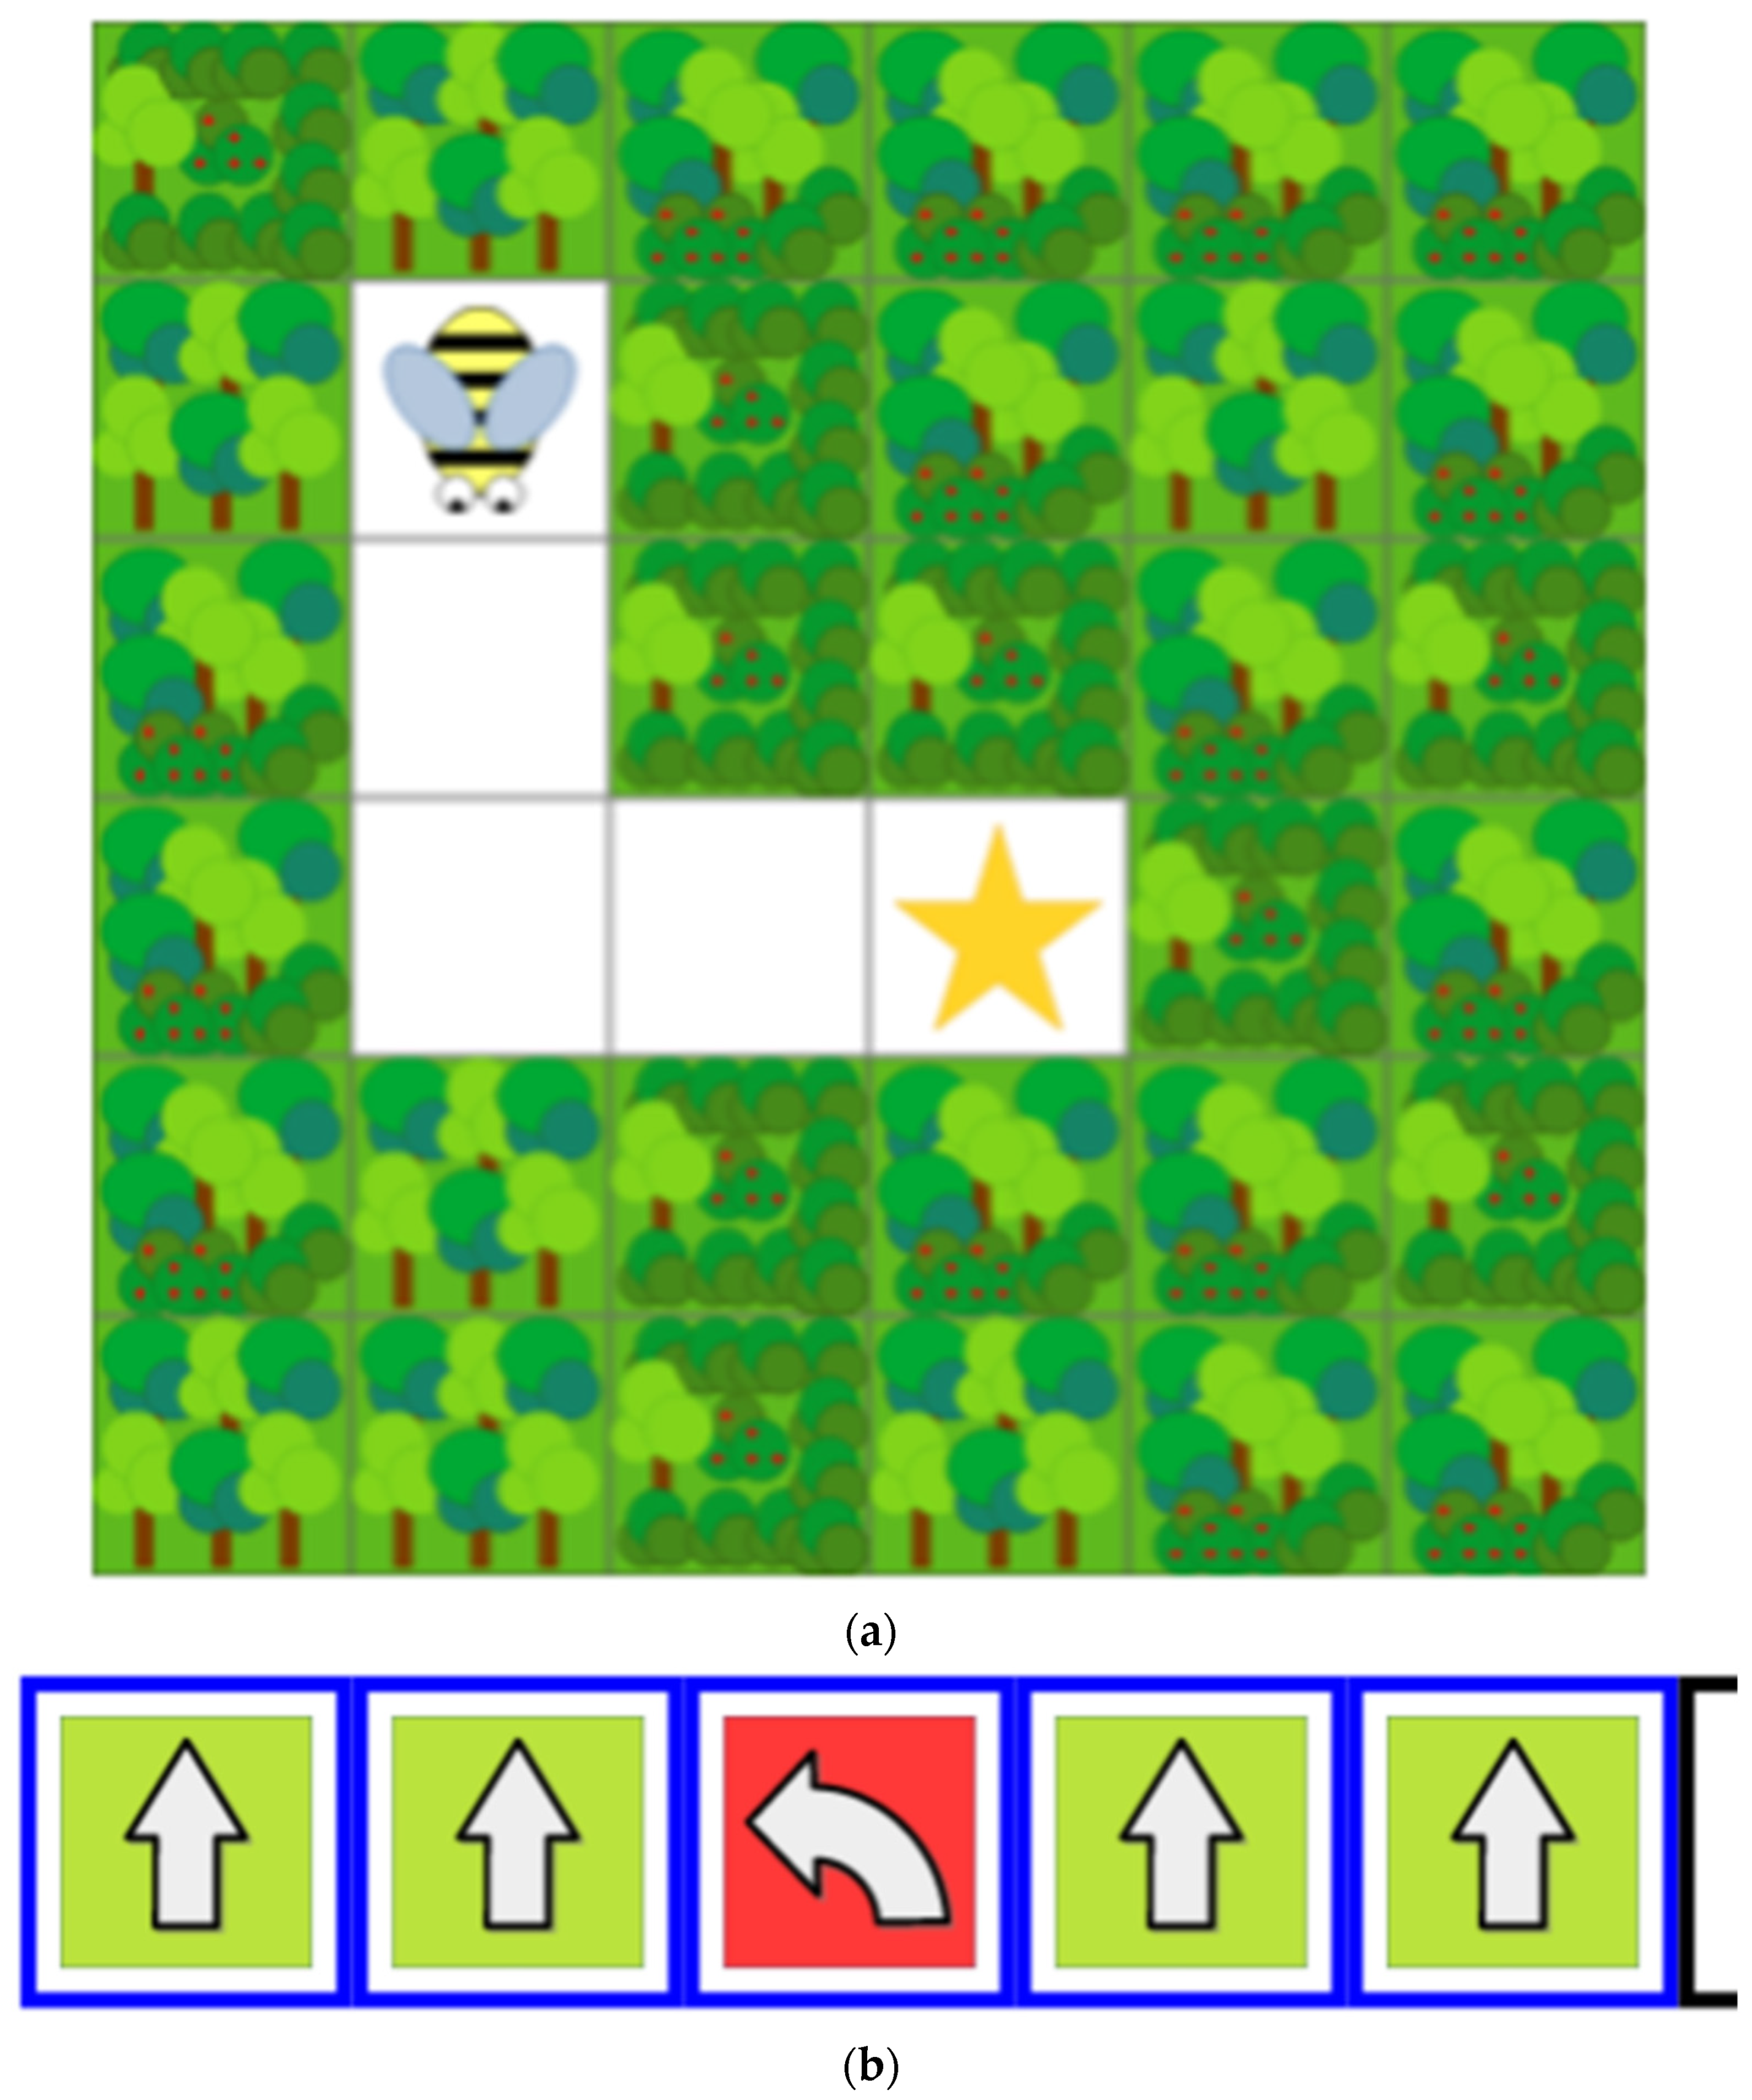 snakes and ladders - Google Search  Bee bot activities, Snakes and  ladders, Beebot